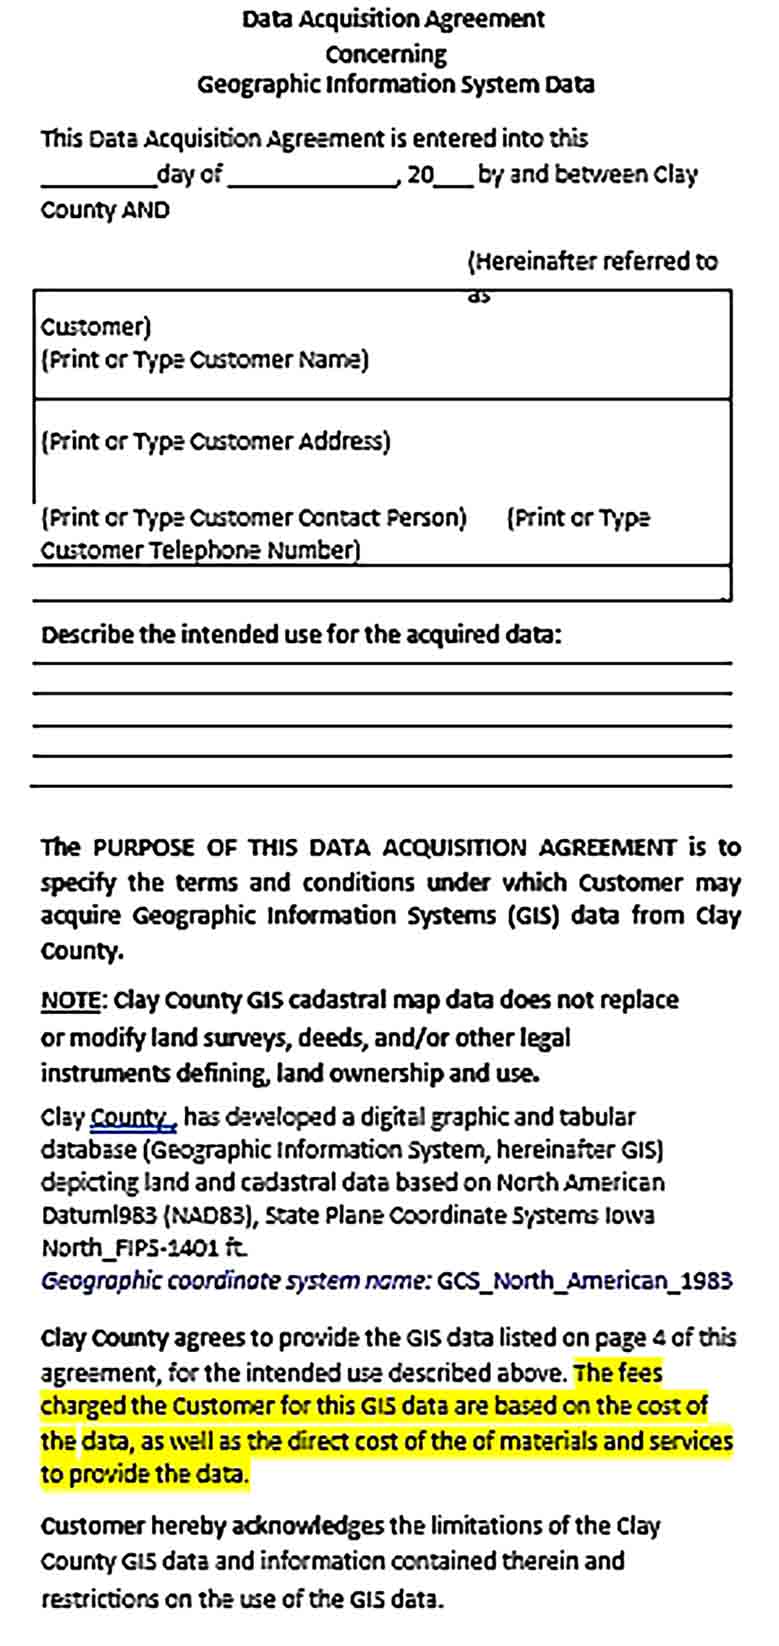 Sample Data Acquisition Agreement